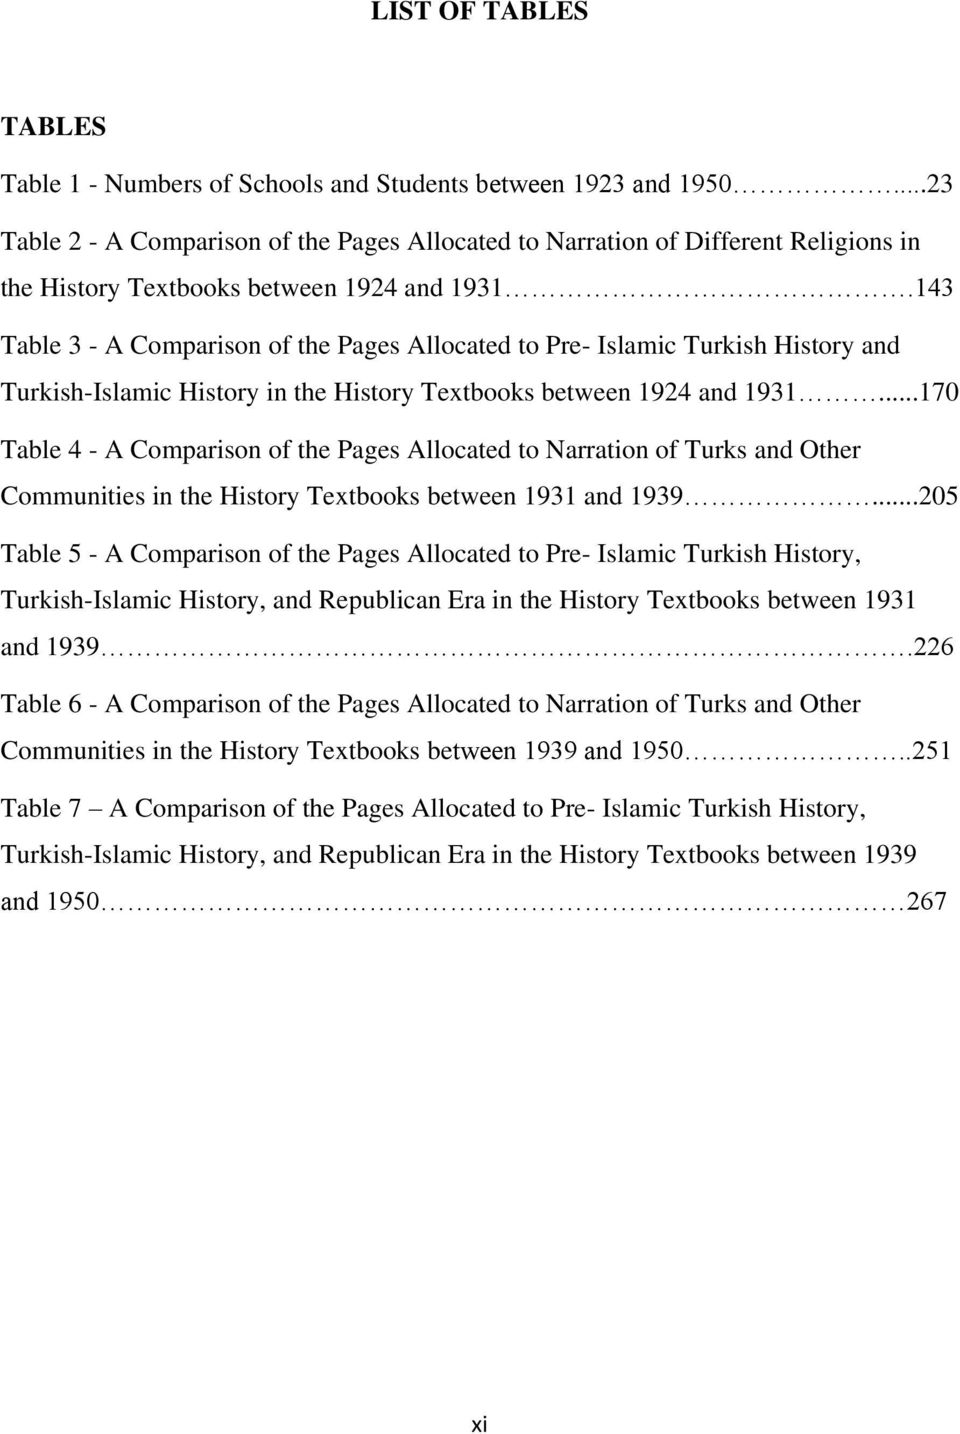 143 Table 3 - A Comparison of the Pages Allocated to Pre- Islamic Turkish History and Turkish-Islamic History in the History Textbooks between 1924 and 1931.